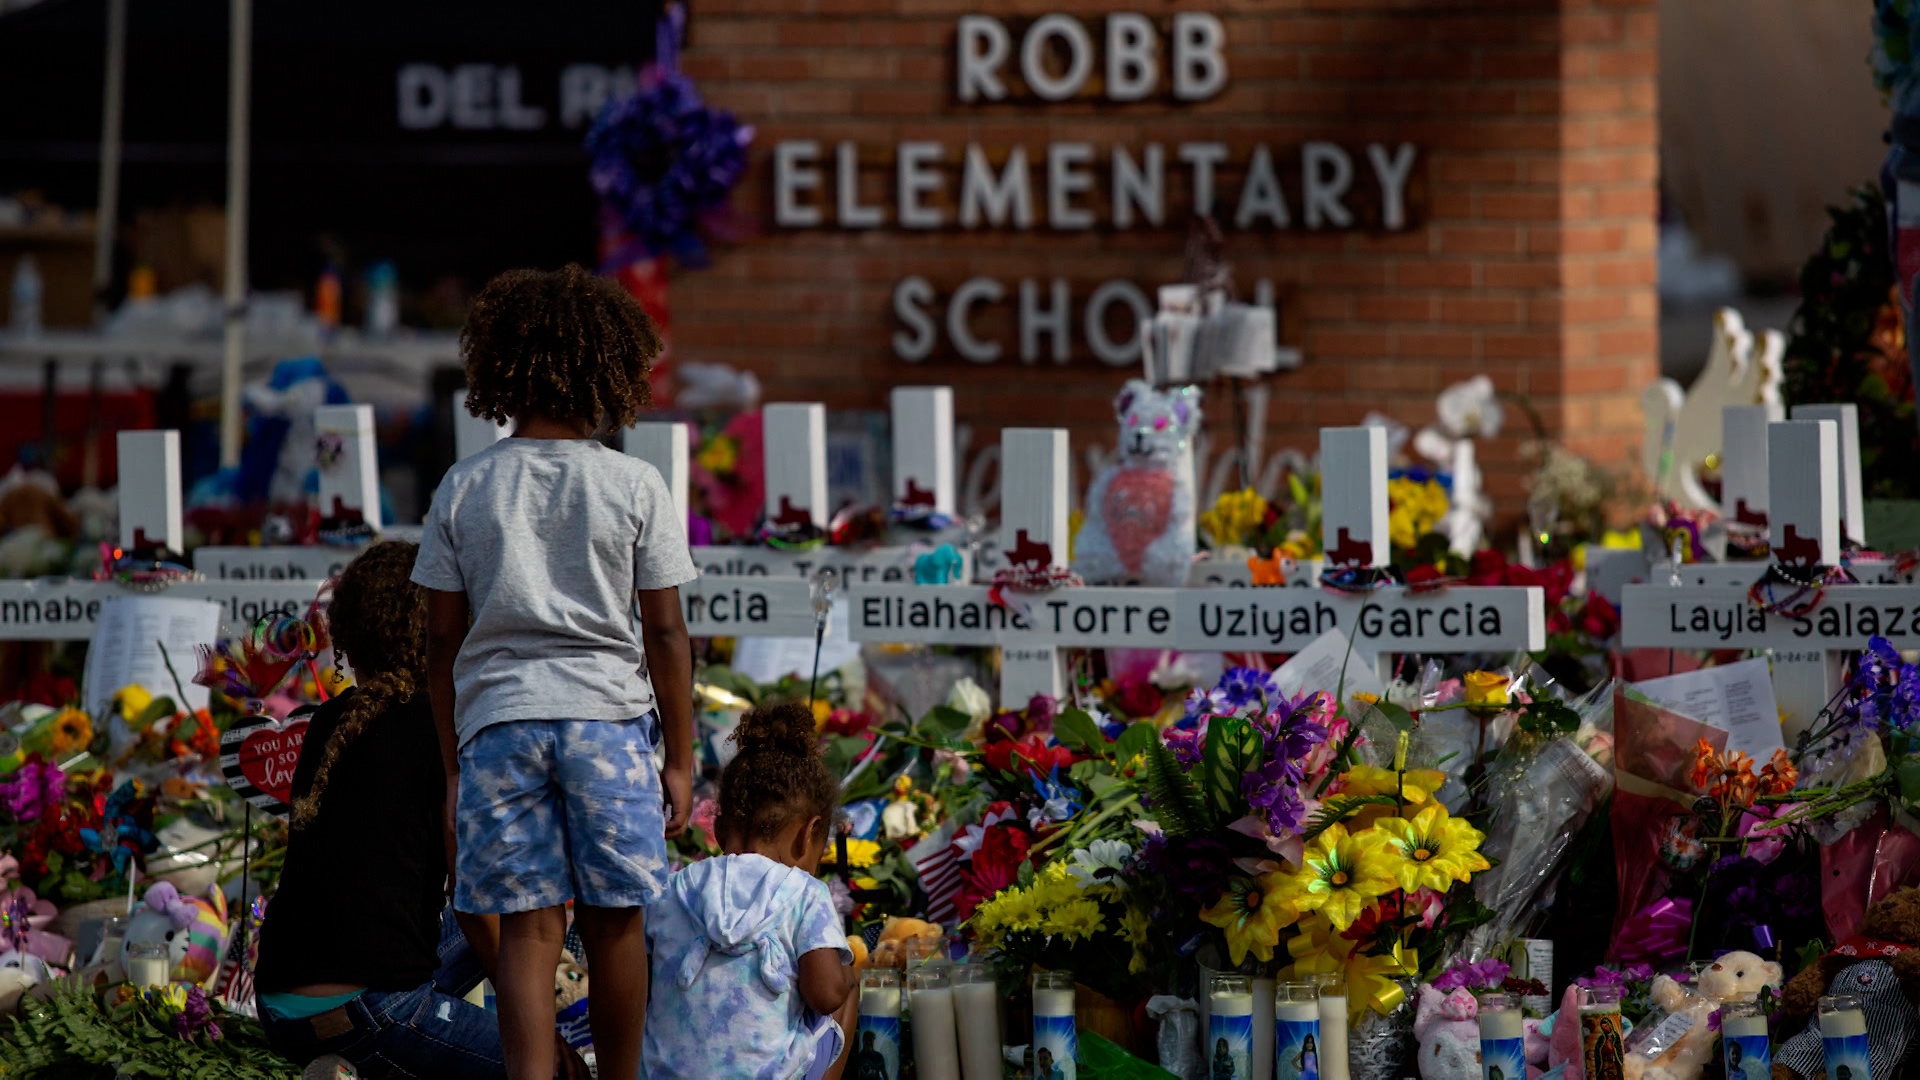 Two children are honoring those who have fallen at a memorial in Robb Elementary in Uvalde.